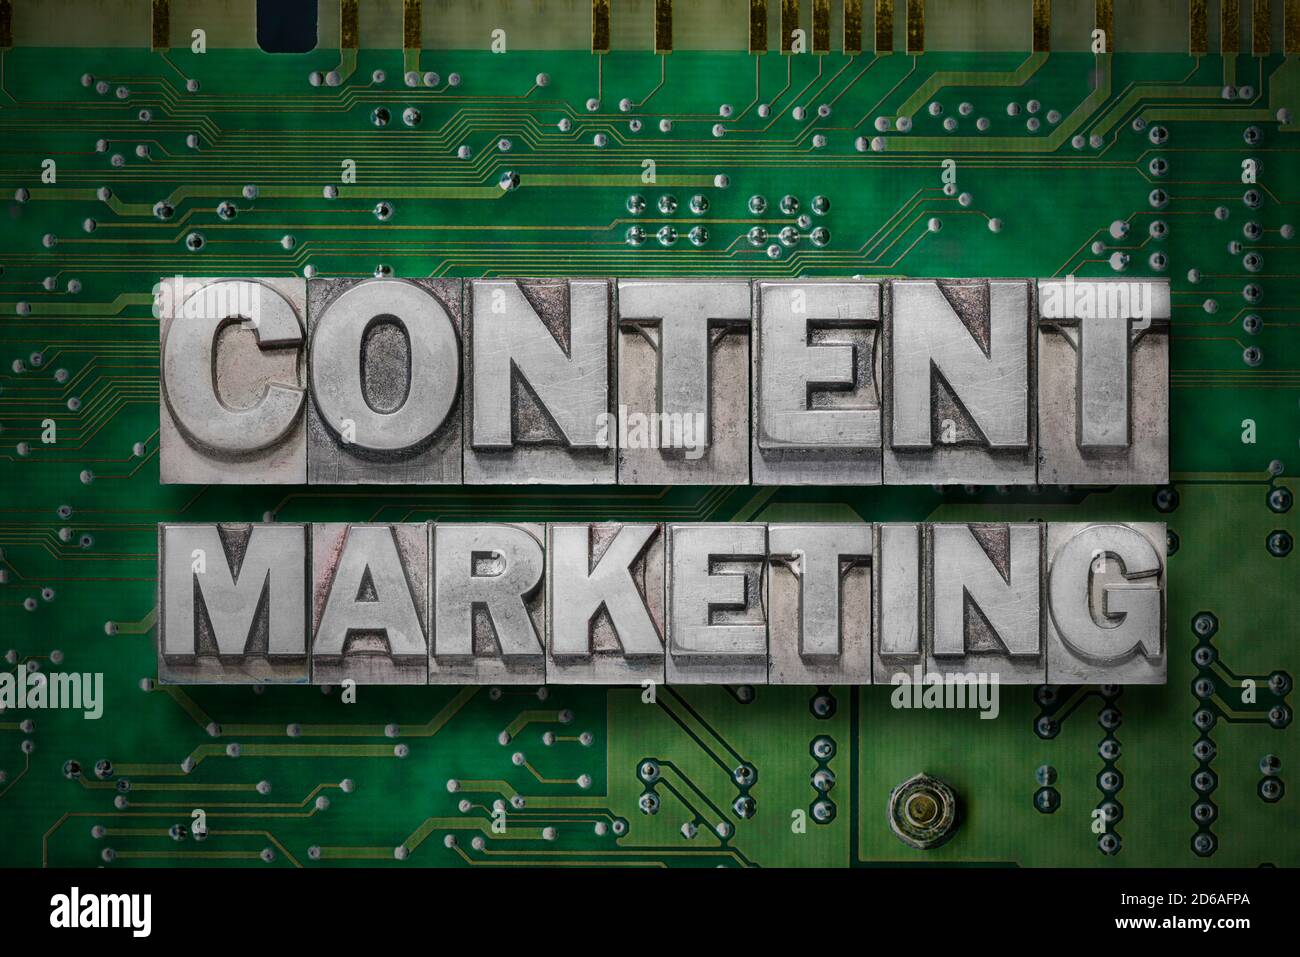 content marketing phrase made from metallic letterpress blocks on the pc board background Stock Photo